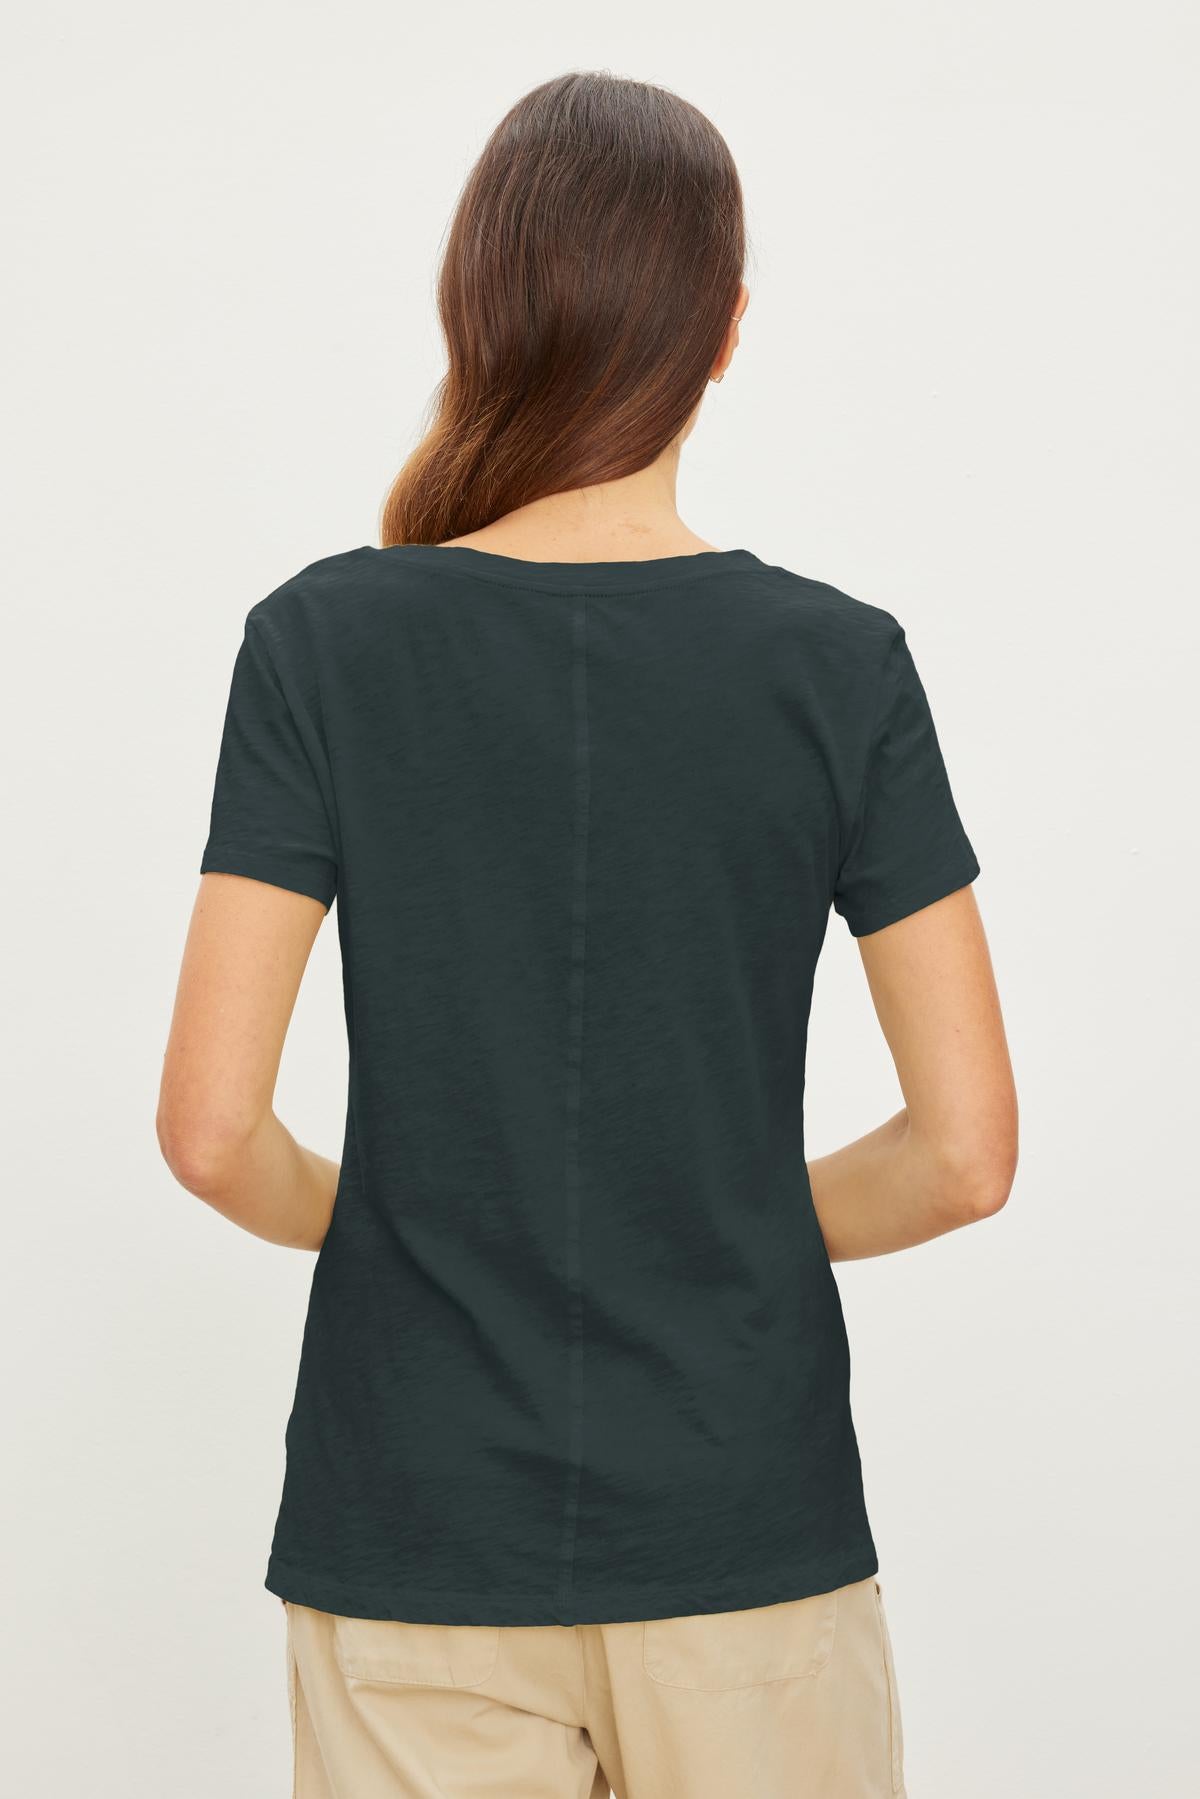 A person with long hair is shown from the back, wearing a dark green short-sleeved V-neck LILITH TEE by Velvet by Graham & Spencer and beige pants, standing against a plain white background. The shirt's cotton slub fabric adds a touch of luxurious softness.-37241138741441